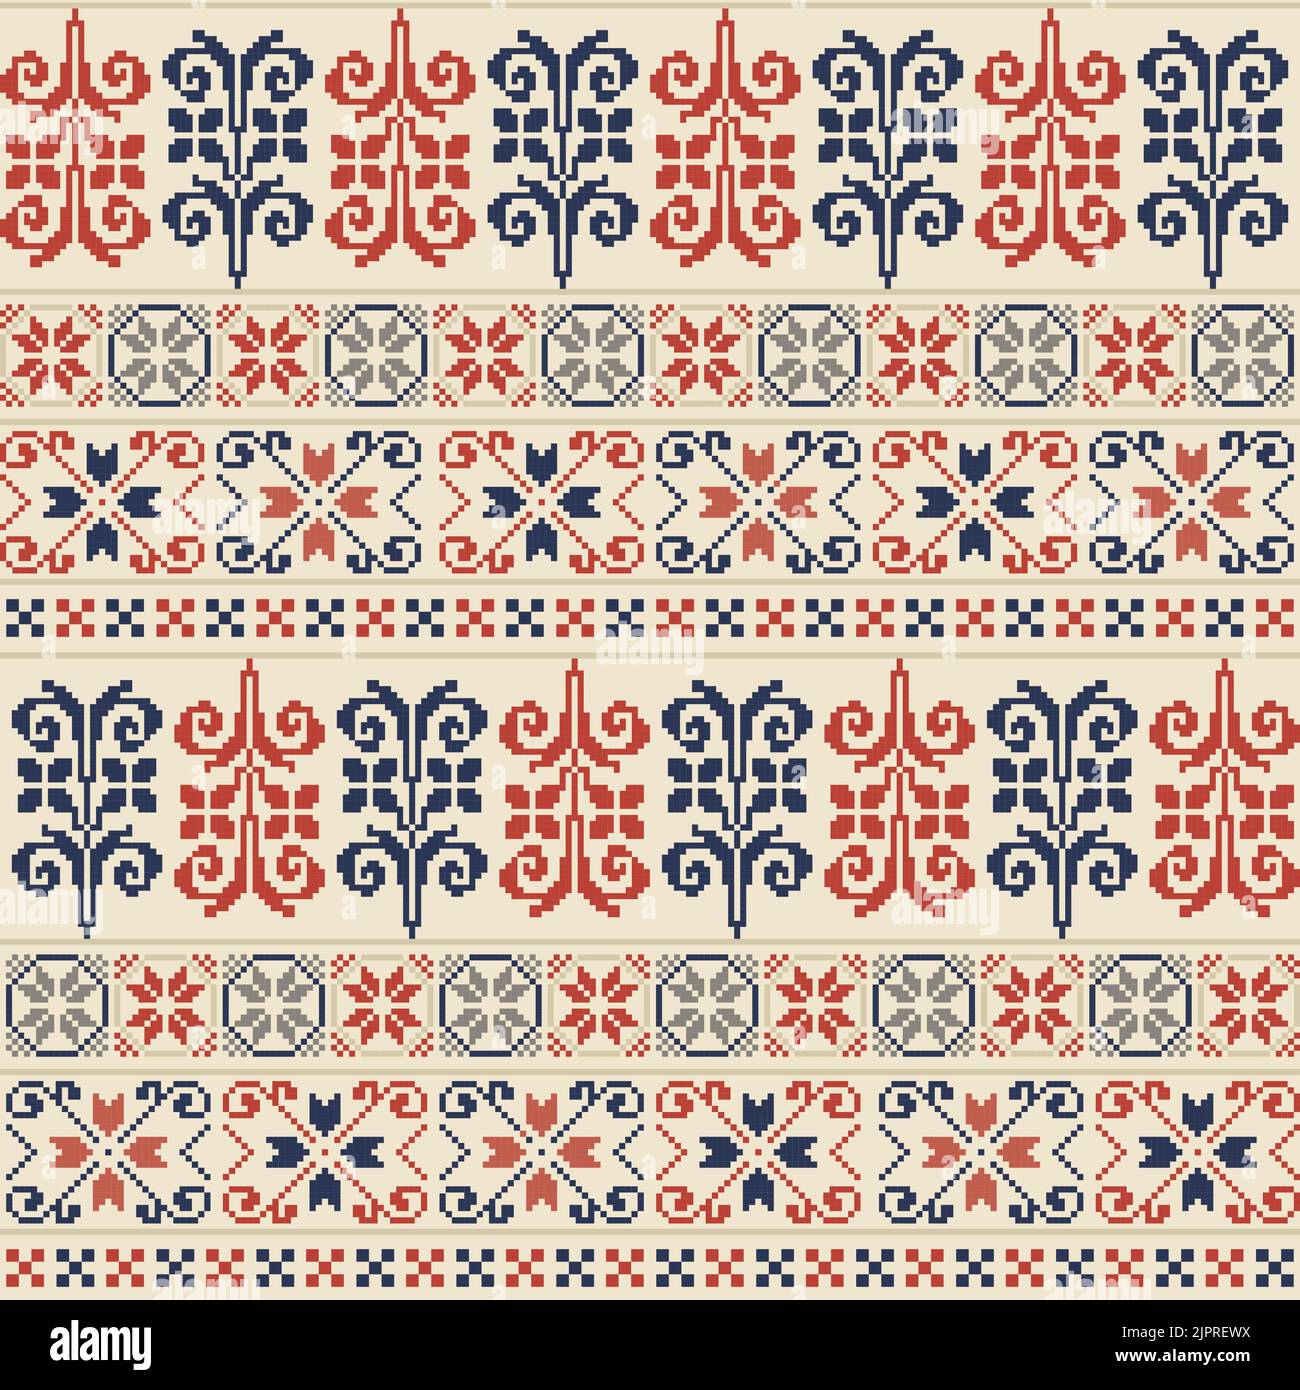 Seamless pattern design with traditional Palestinian embroidery motif Stock Photo